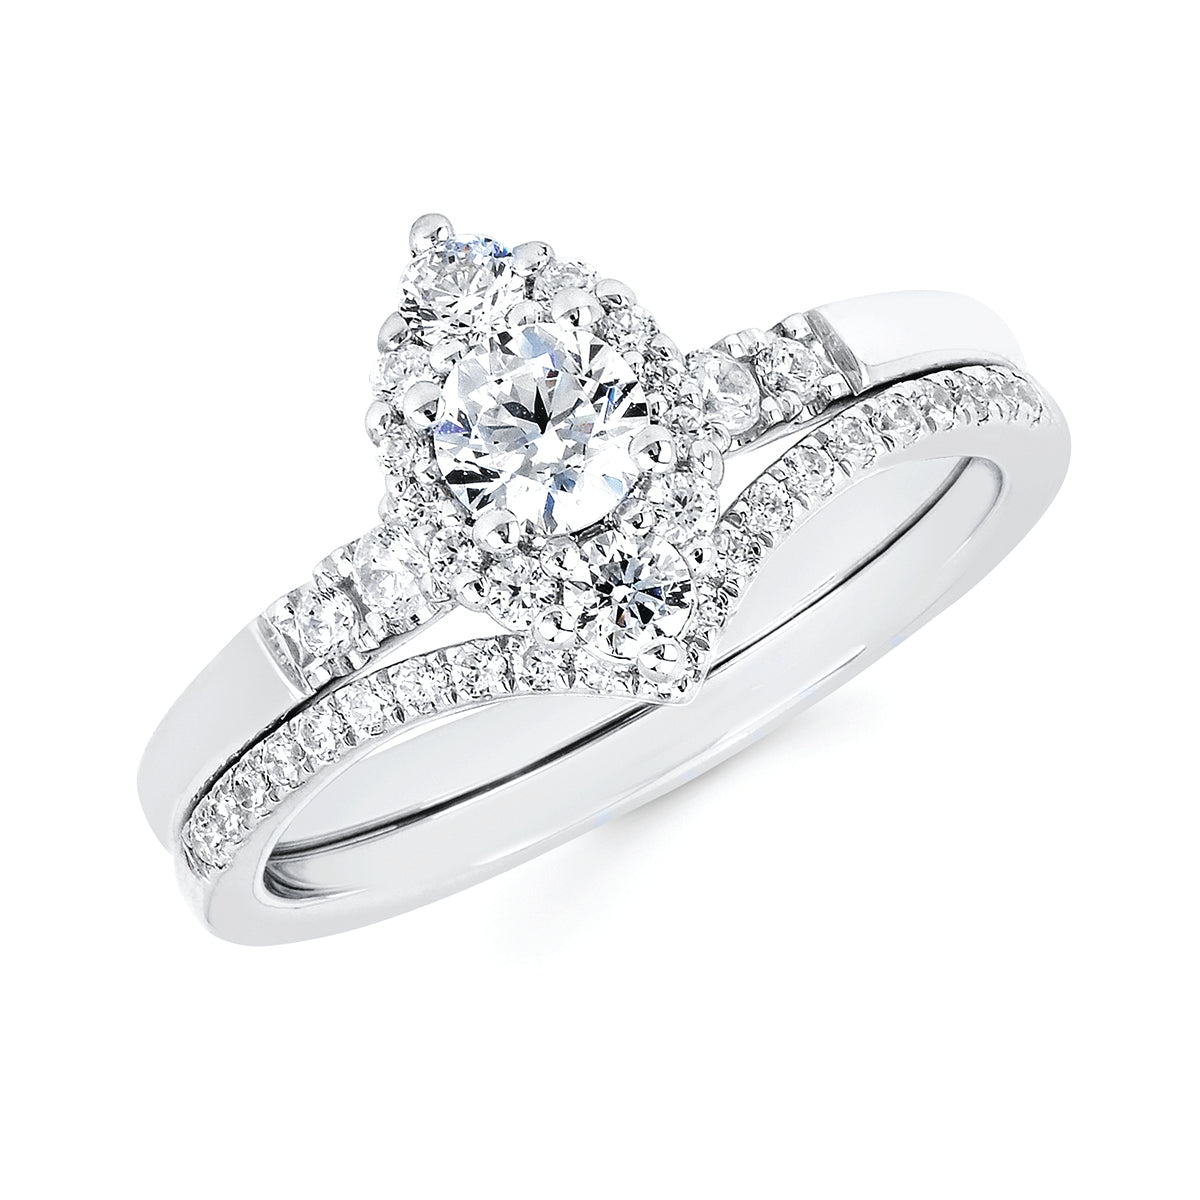 Halo Bridal: 1/3 Ctw. Diamond Halo Semi Mount available for 1/3 Ct. Round Center Diamond in 14K Gold